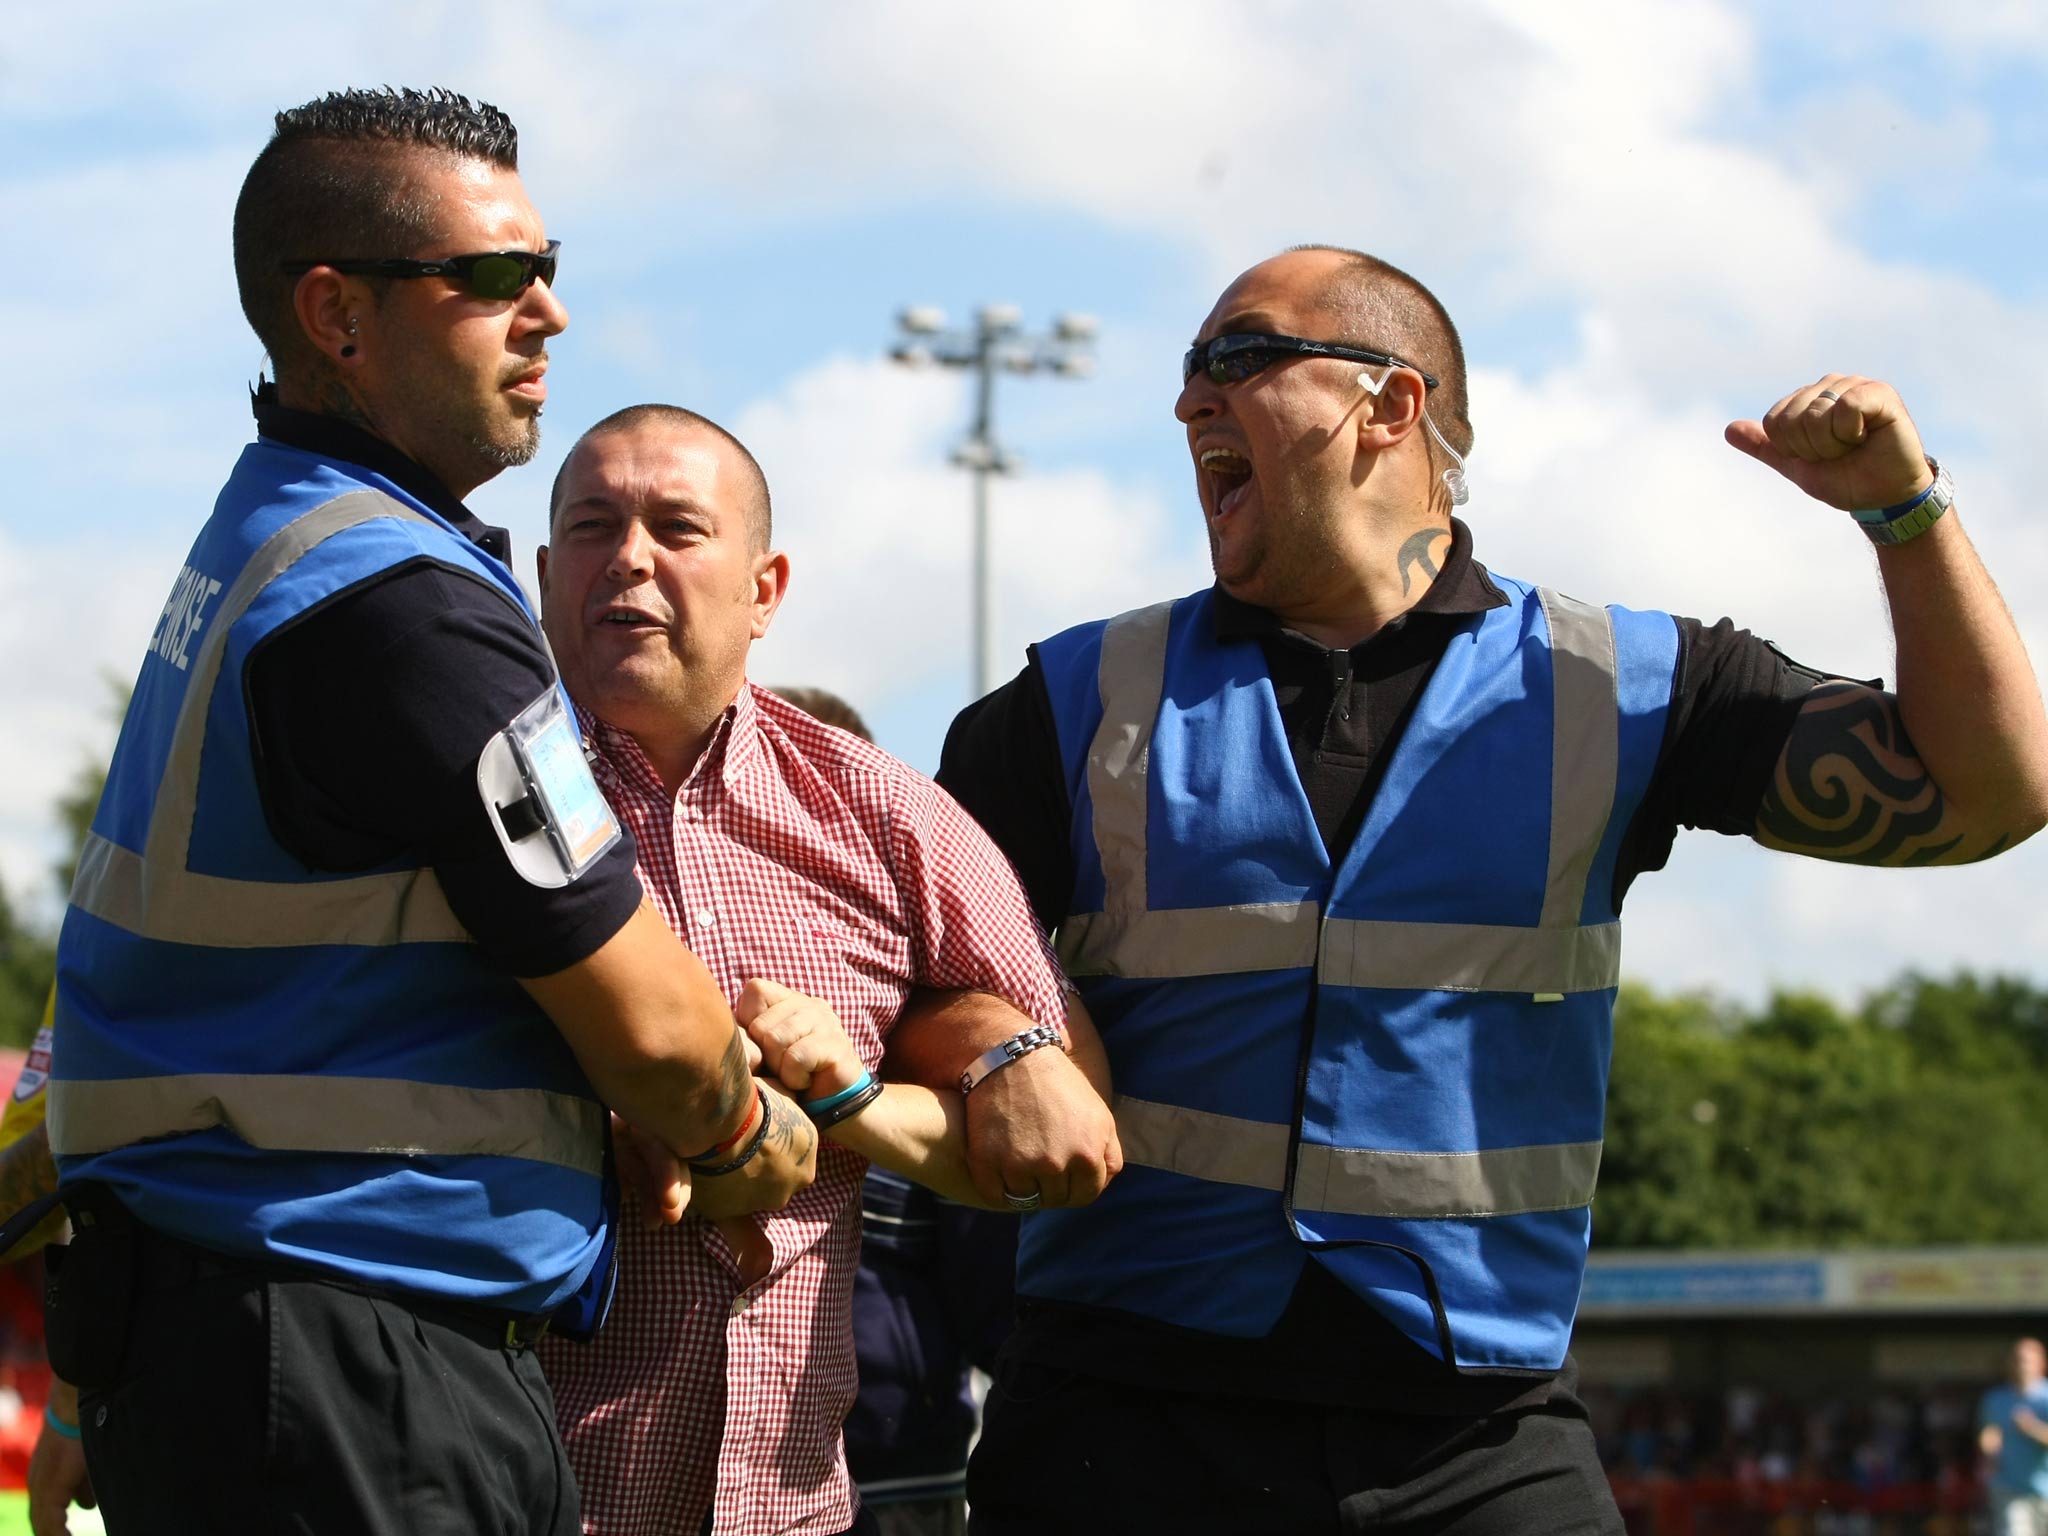 A Coventry City supporter is restrained by security after a pitch-invasion during the Sky Bet League One match against Crawley Town